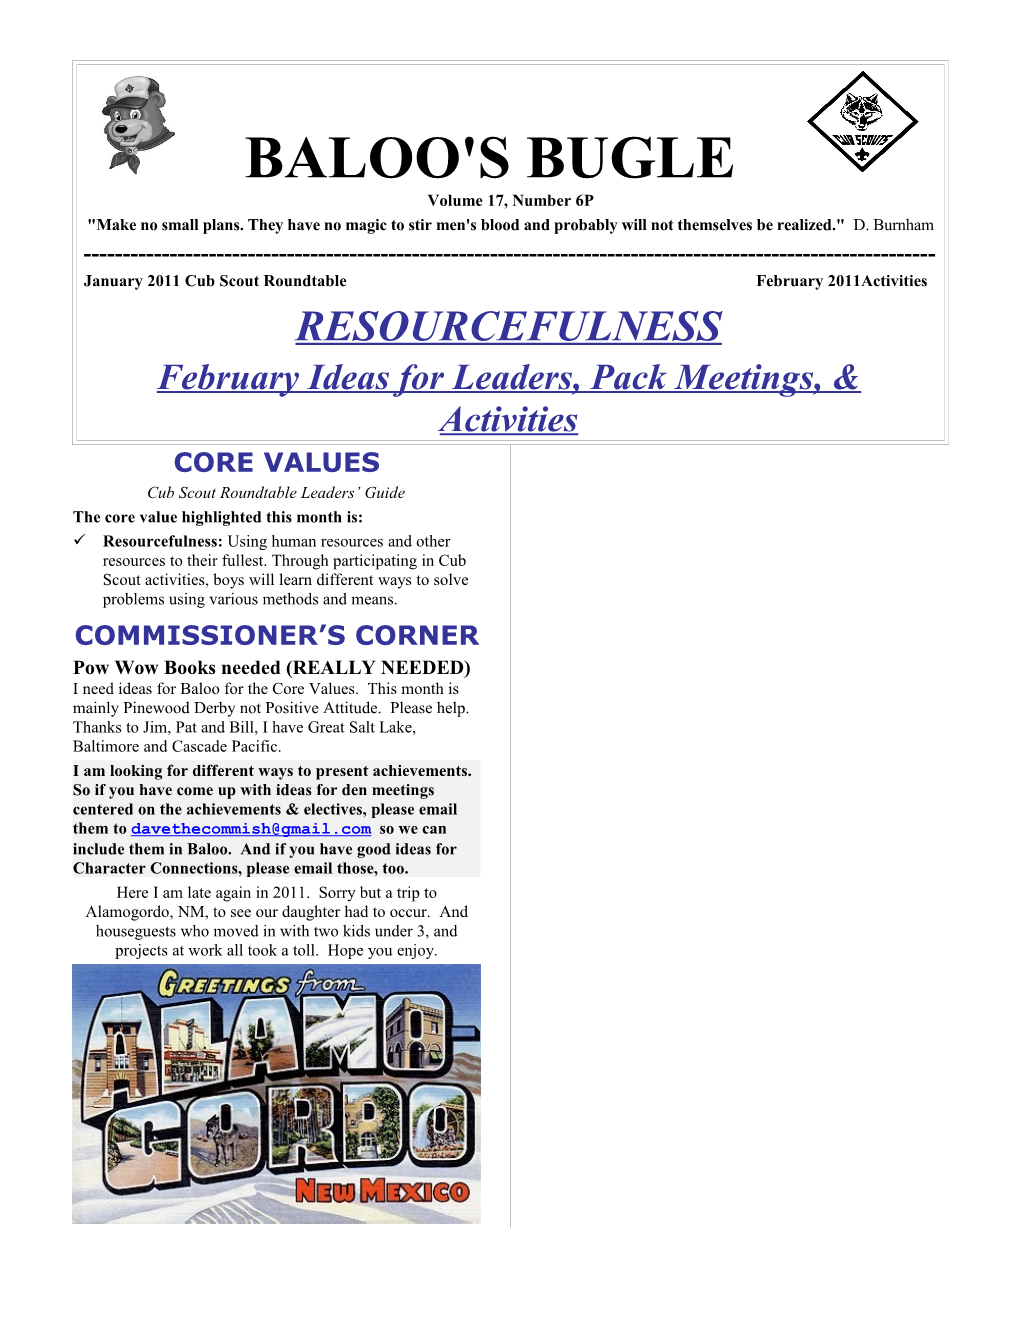 BALOO's BUGLE - PACK EDITION Page 2